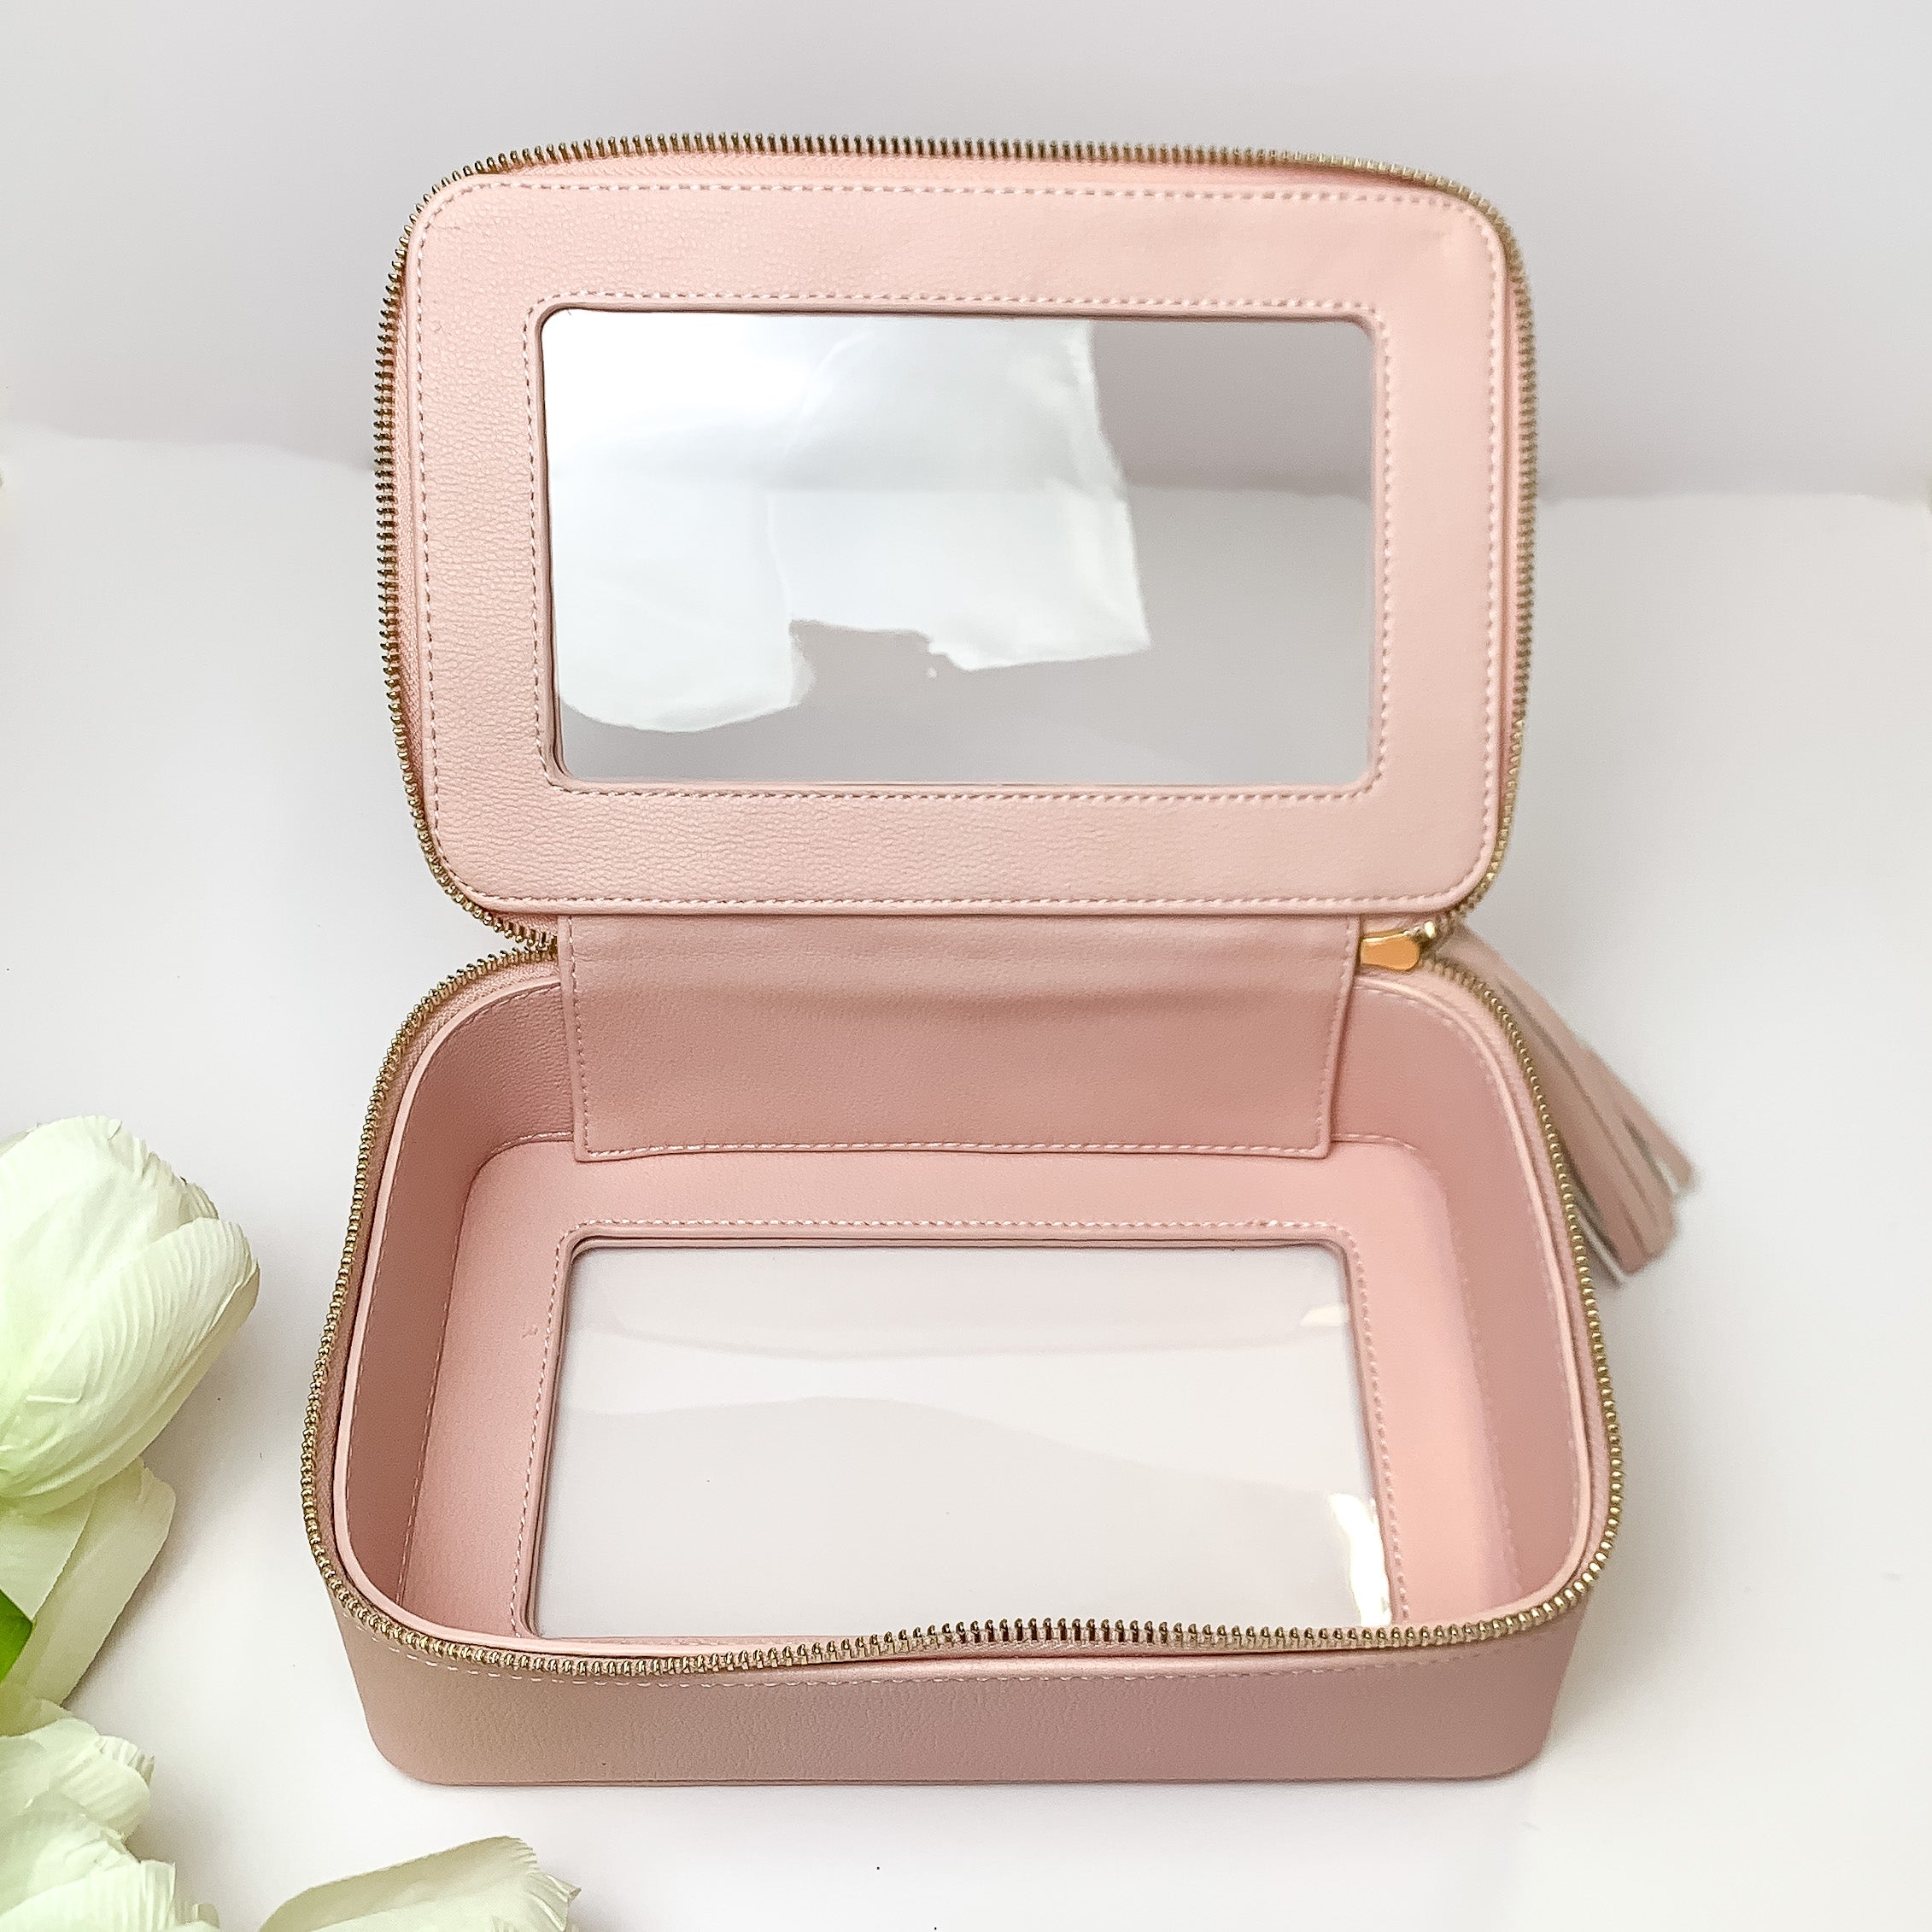 Hollis | Clear Toiletry Bag in Blush